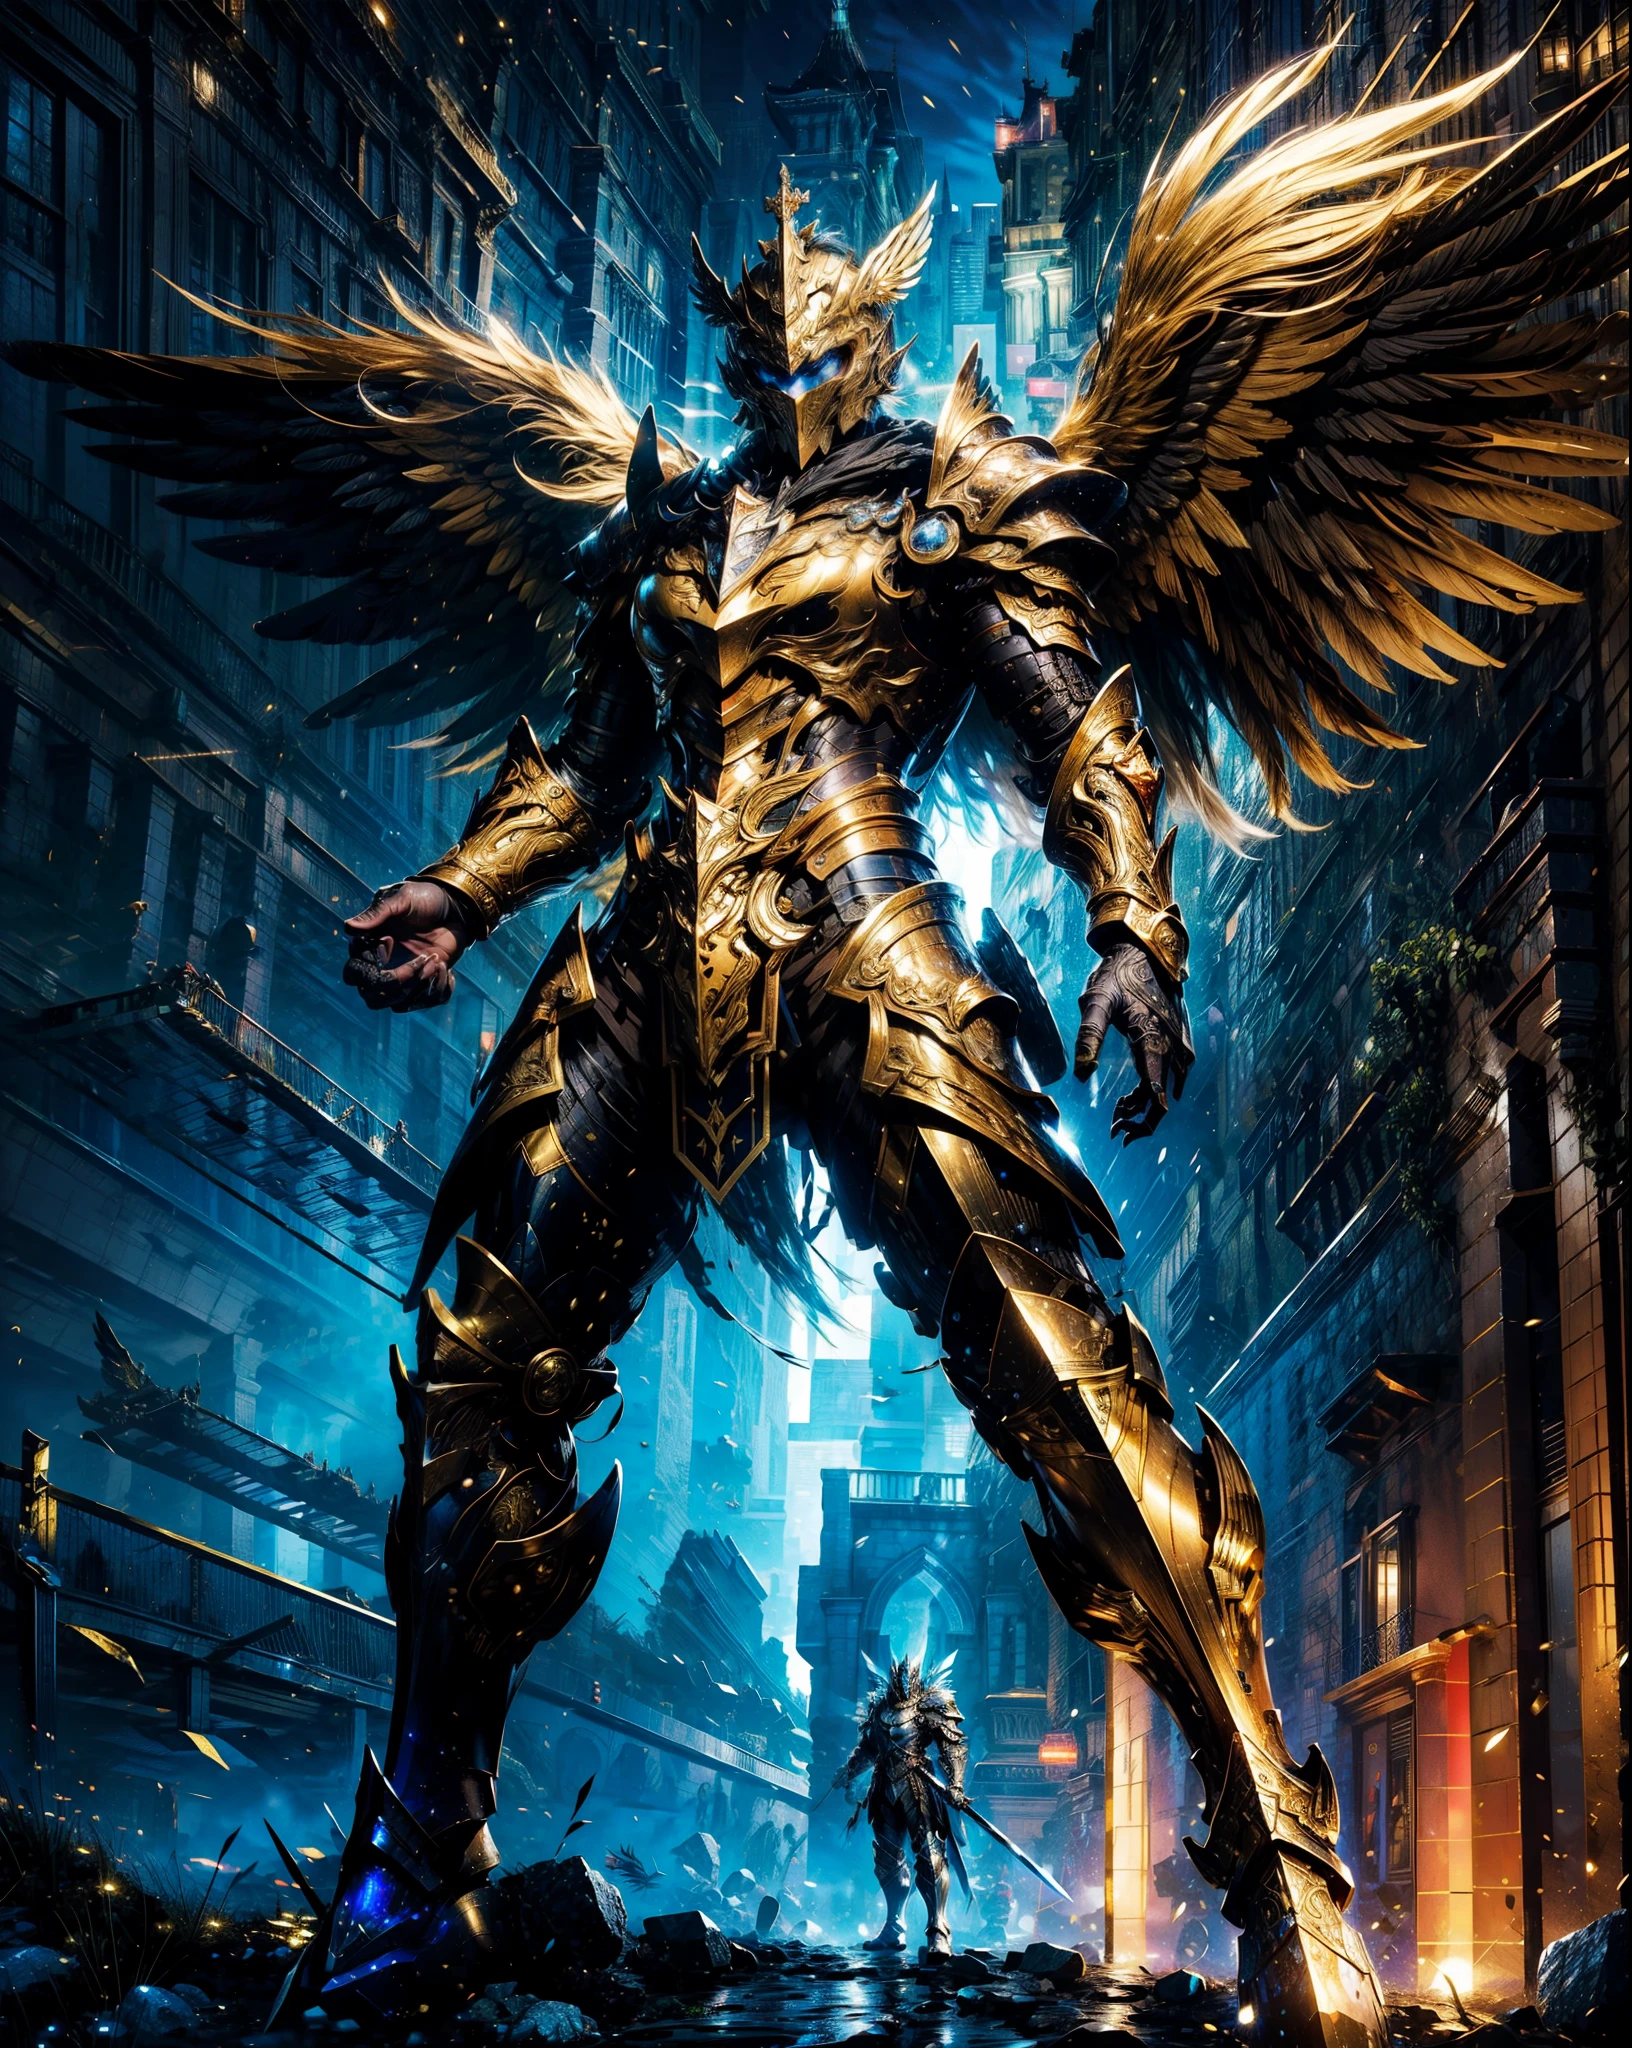 (best quality,ultra-detailed),Celestial Knight, flying, four large wings, golden plate armor with white and gold accents,divine armor,elaborate and detailed filigree metal design,sacred aura,imposing presence,full body shot, fitness body, epic battle-ready stance,stunning background of a majestic castle in sky,large sword in hand,exquisite craftsmanship and attention to detail,vivid colors to emphasize the regal nature of the knight,strong and confident expression,flawless lighting to highlight every intricate detail,perfectly balanced composition reminiscent of classical art,commanding and awe-inspiring.